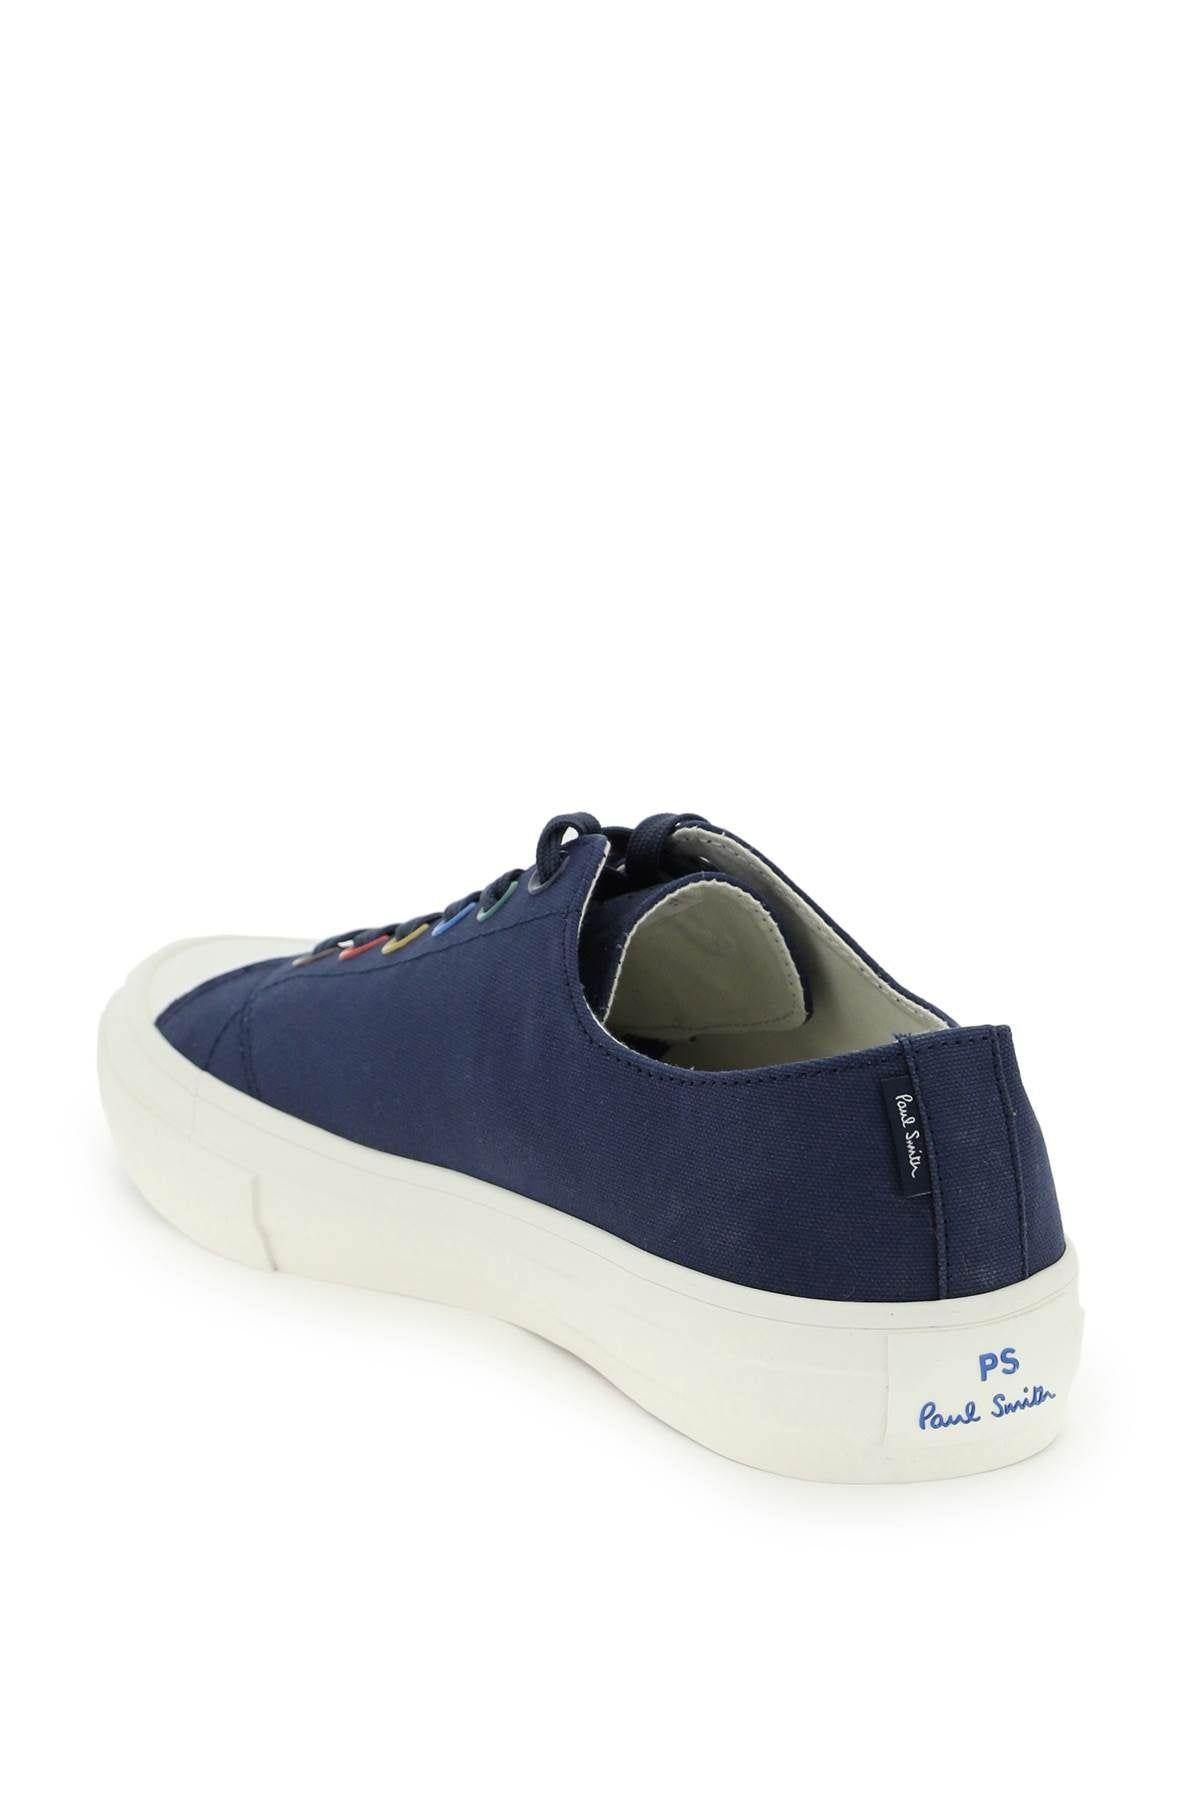 PS by Paul Smith 'kinsey' Sneakers in Blue for Men | Lyst